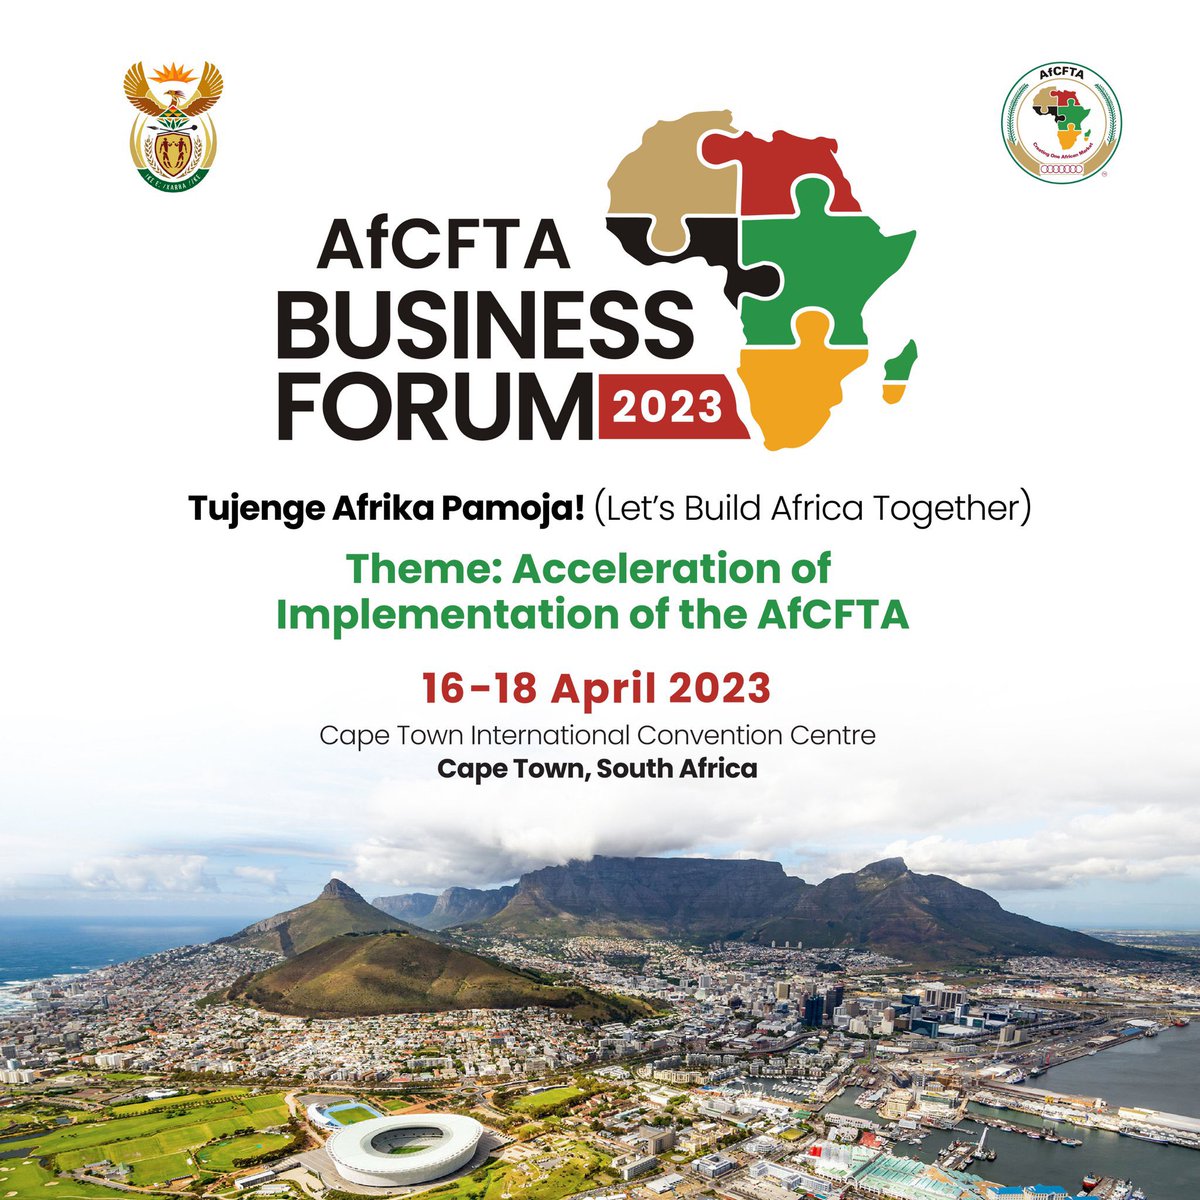 Day 2 of the AfCFTA Business Forum has started. Watch the Business Forum live on Facebook fb.watch/jYNrqoipRD/?mi…

#TujengeAfrikaPamoja
#LetsBuildTogether
#AfCFTABF2023